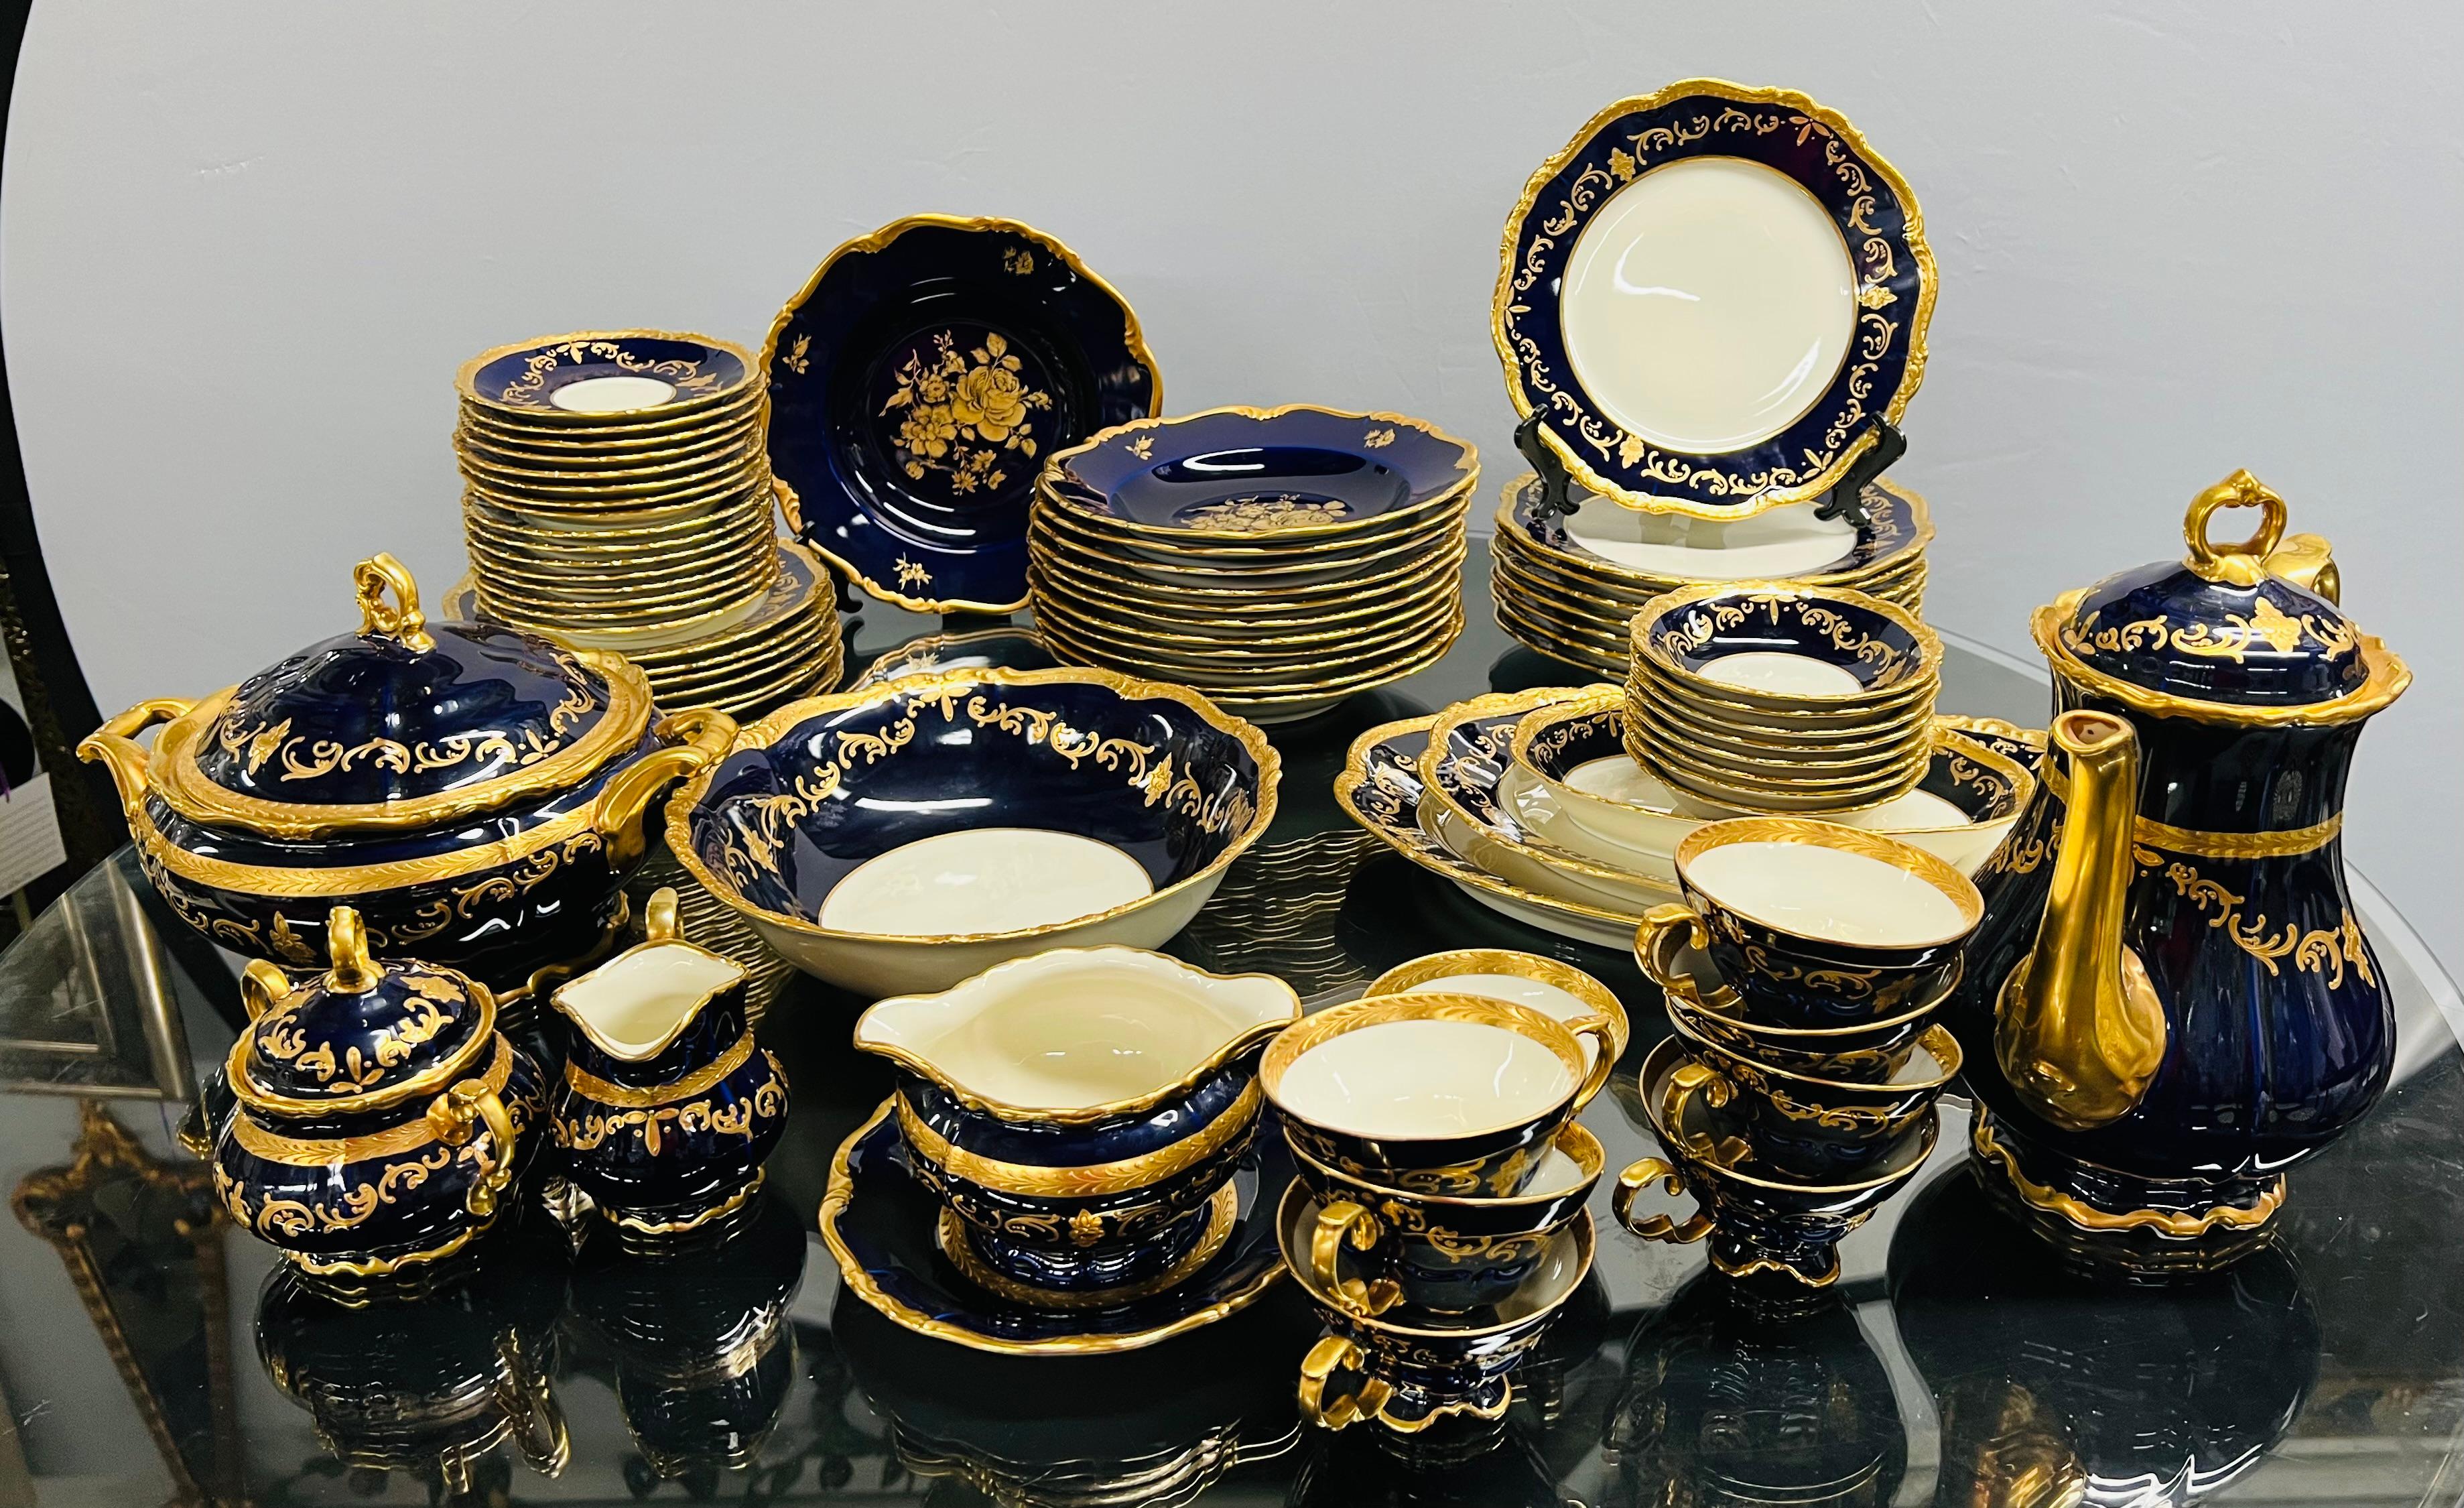 A set of 69 pieces Waldershof Echt Bavaria 22 K cobalt blue China set made in Germany. The beautiful set features fine leaves and floral design and curvy rim shape in 22 K gold. The art nouveau design inspired China set includes 69 pieces including